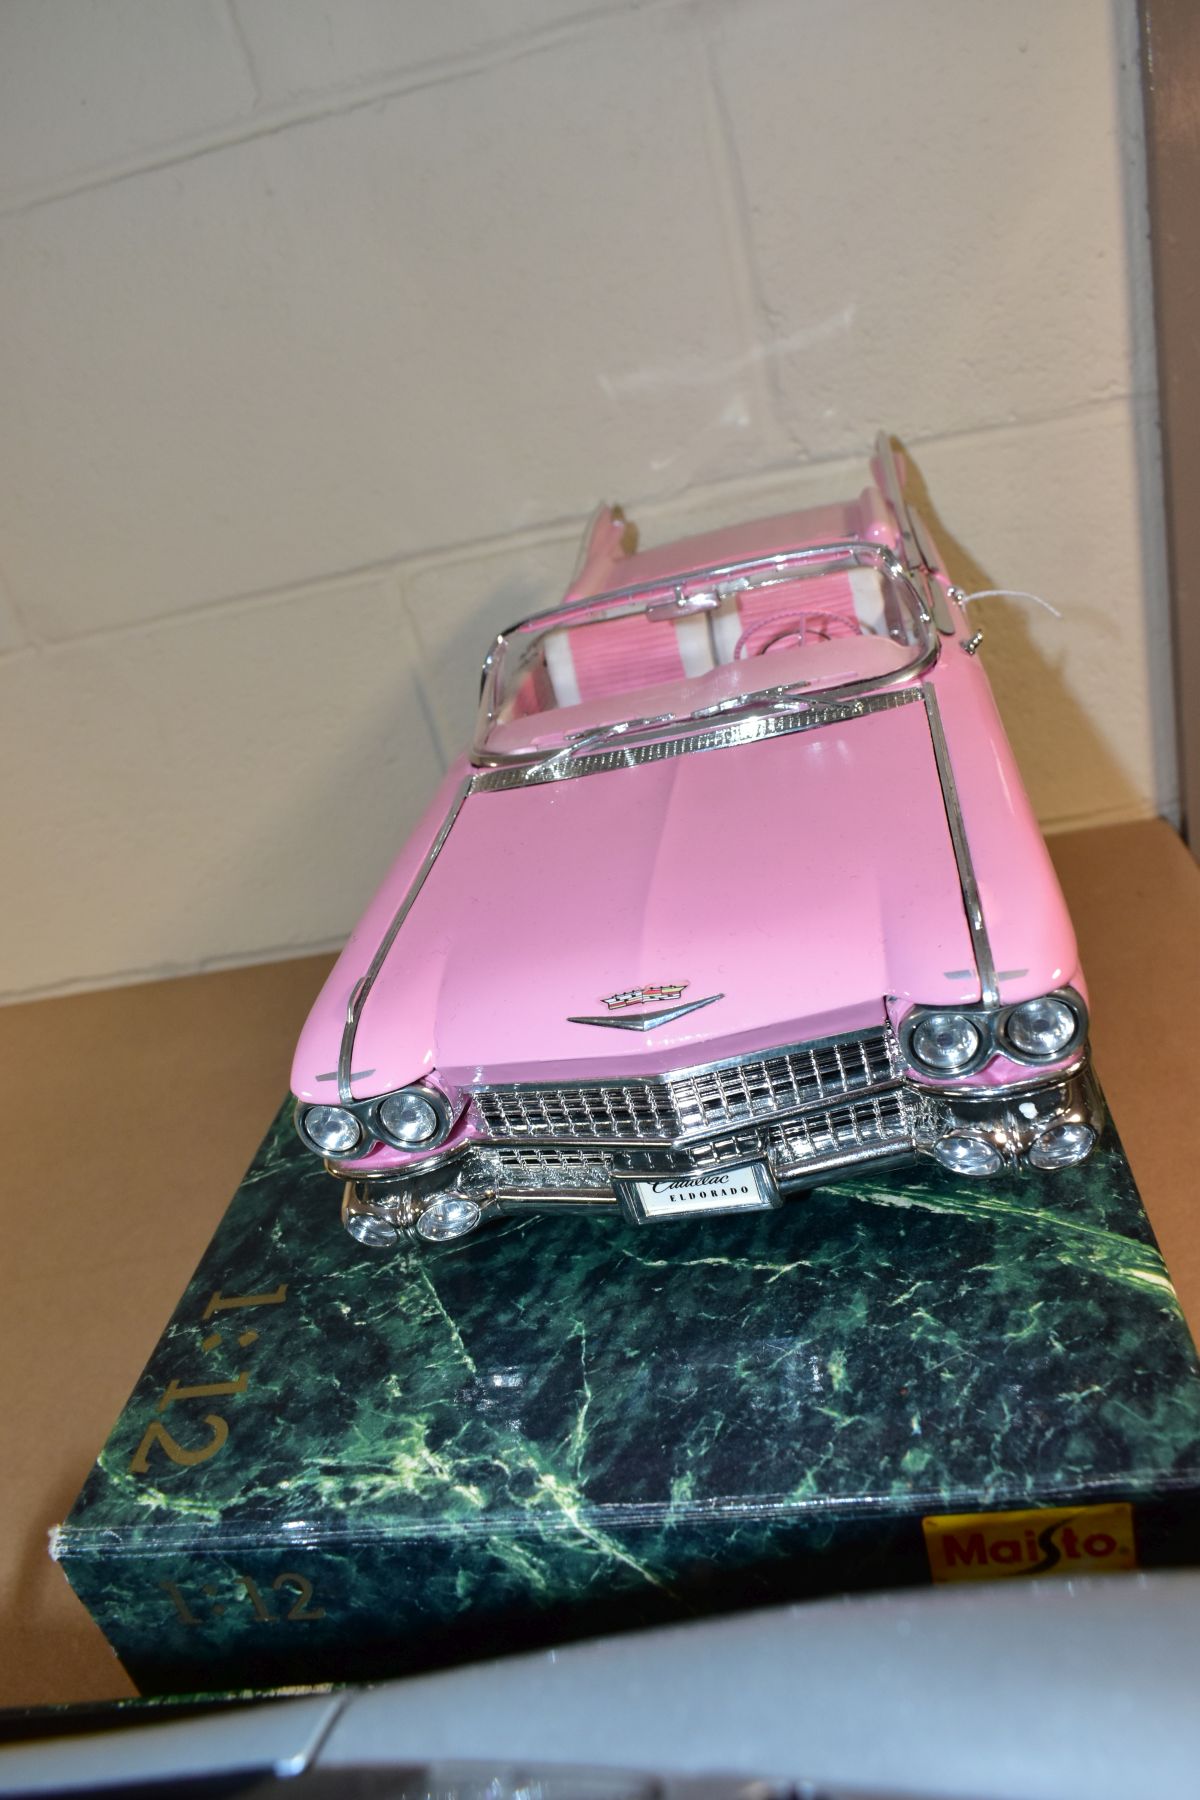 A BOXED MAISTO CADILLAC ELDORADO BIARRITZ (1959), No 33202, 1/12 scale, appears complete and in very - Image 6 of 6